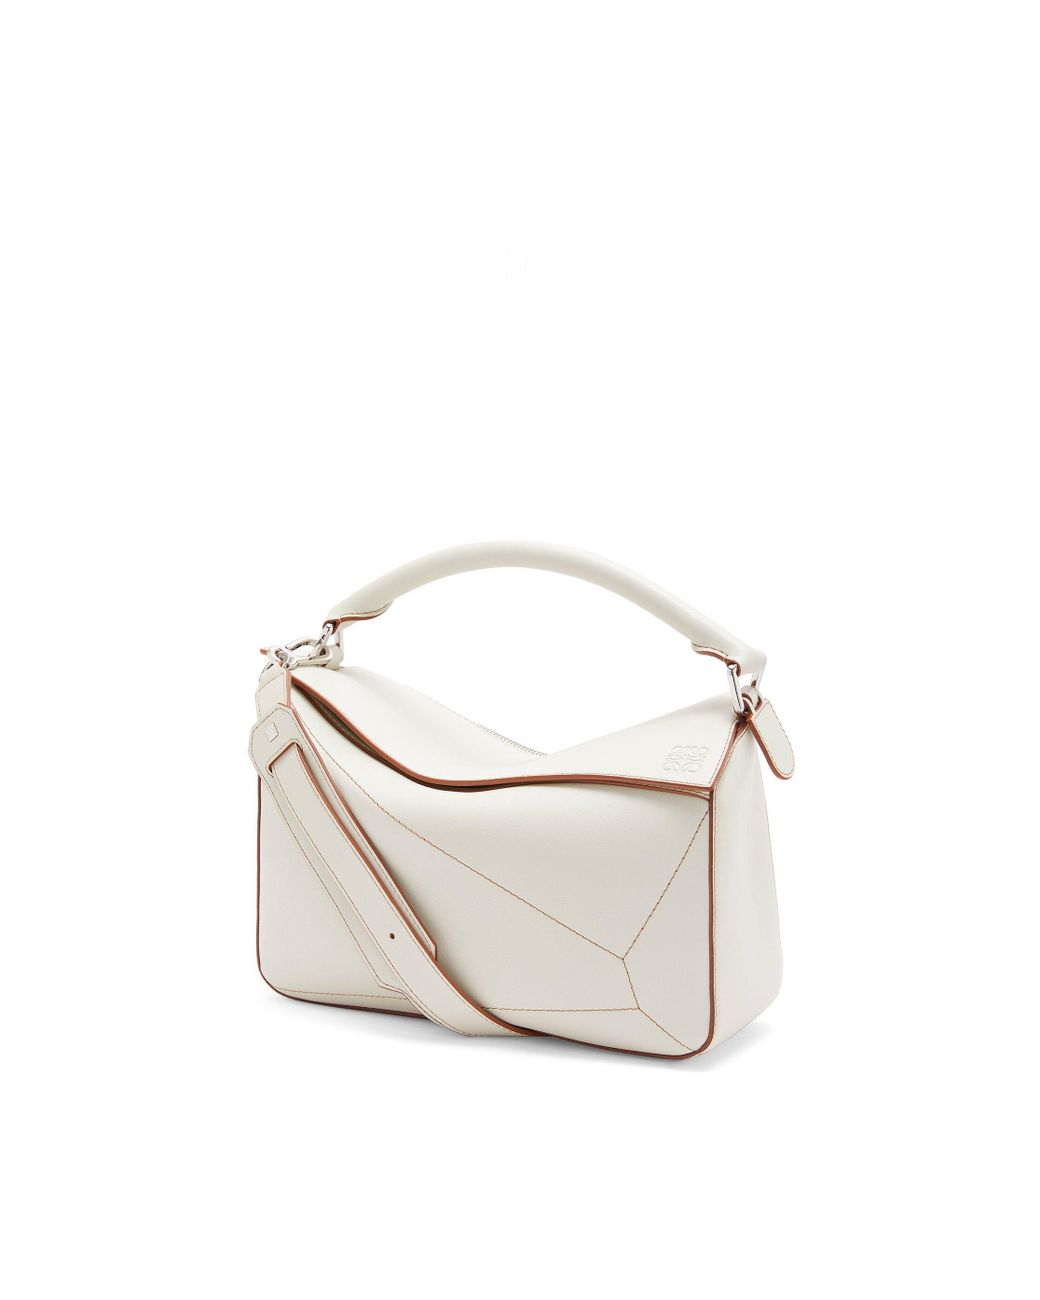 Loewe Puzzle Soft Bag In Nappa Calfskin in White | Lyst